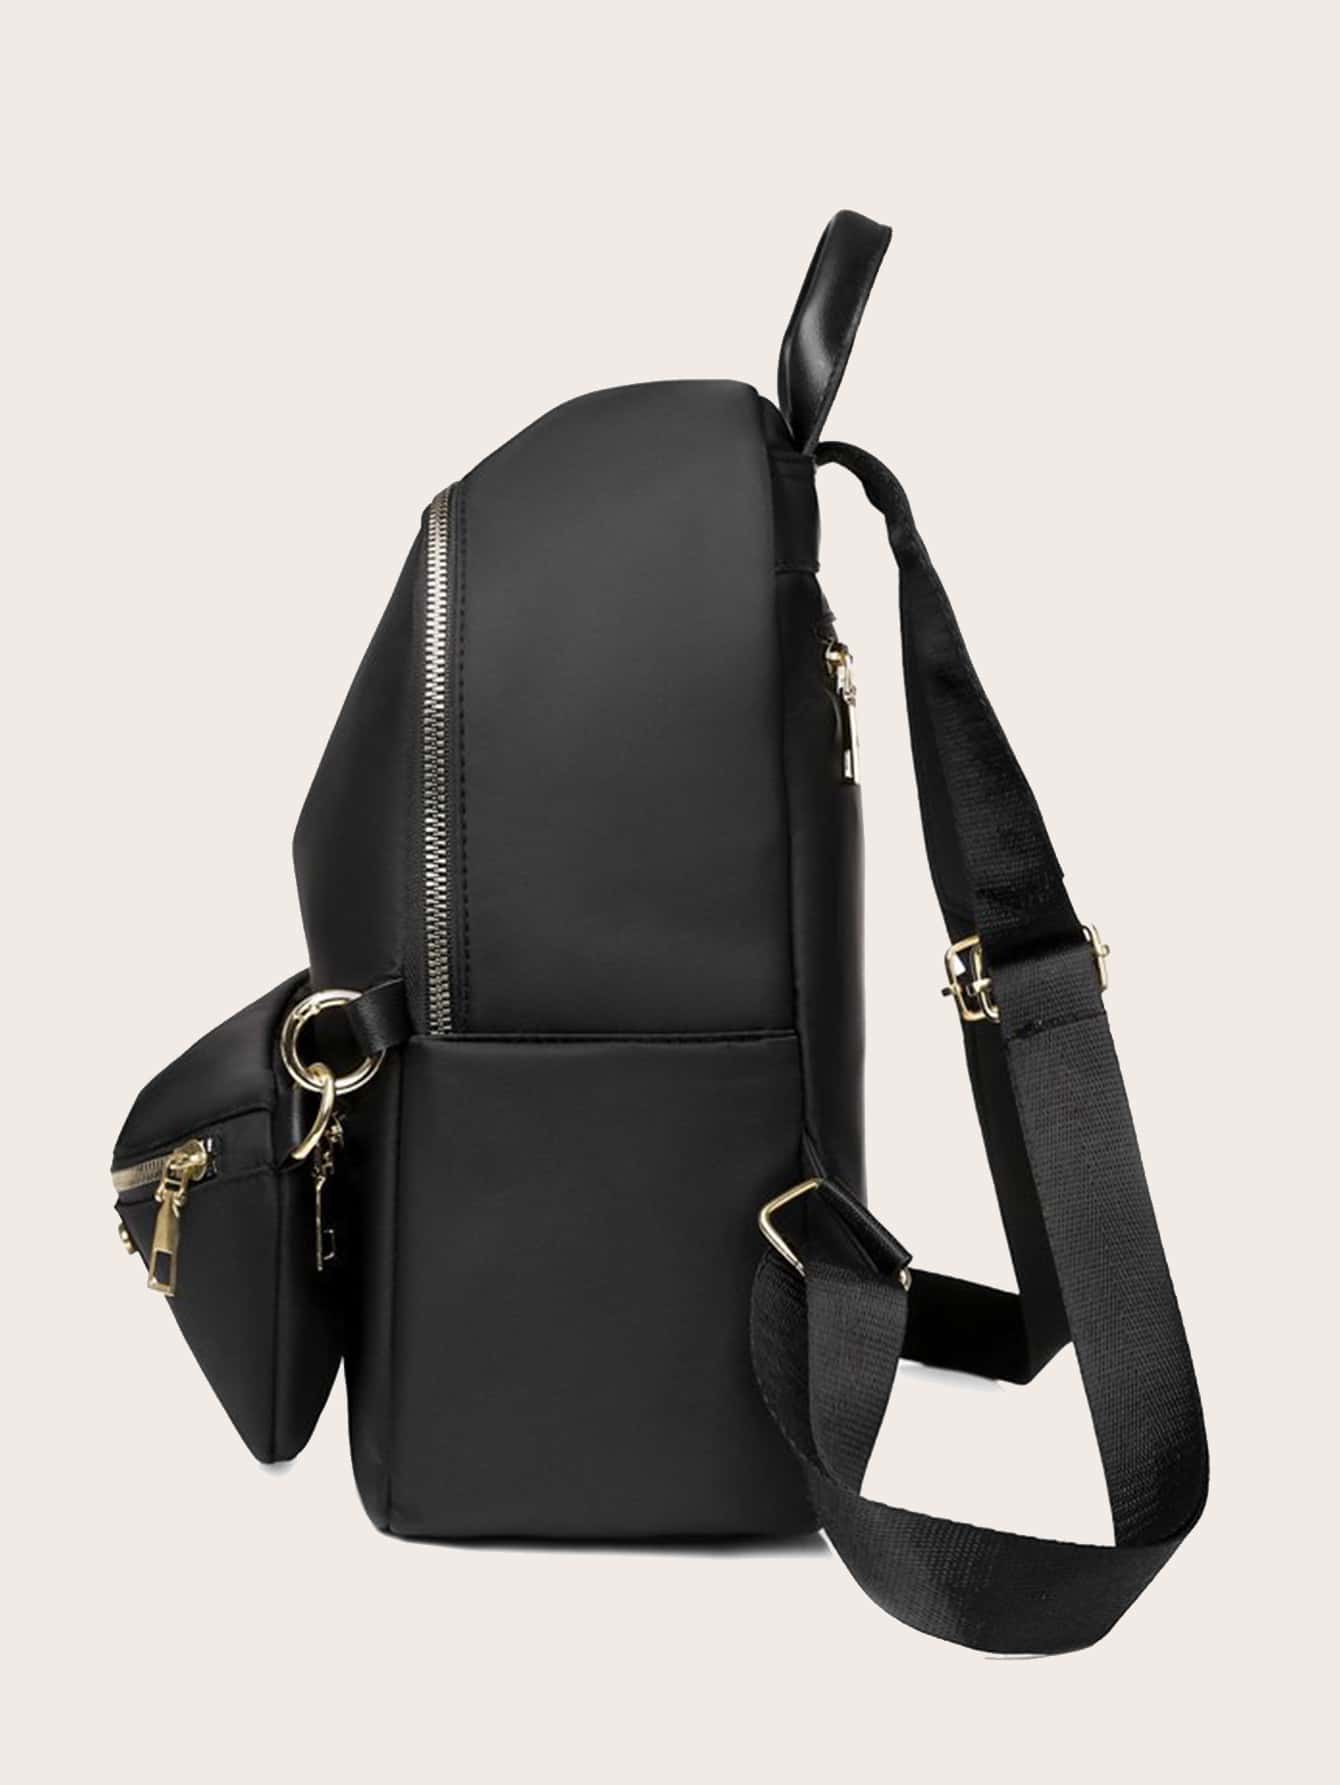 Minimalist Backpack With Fanny Pack